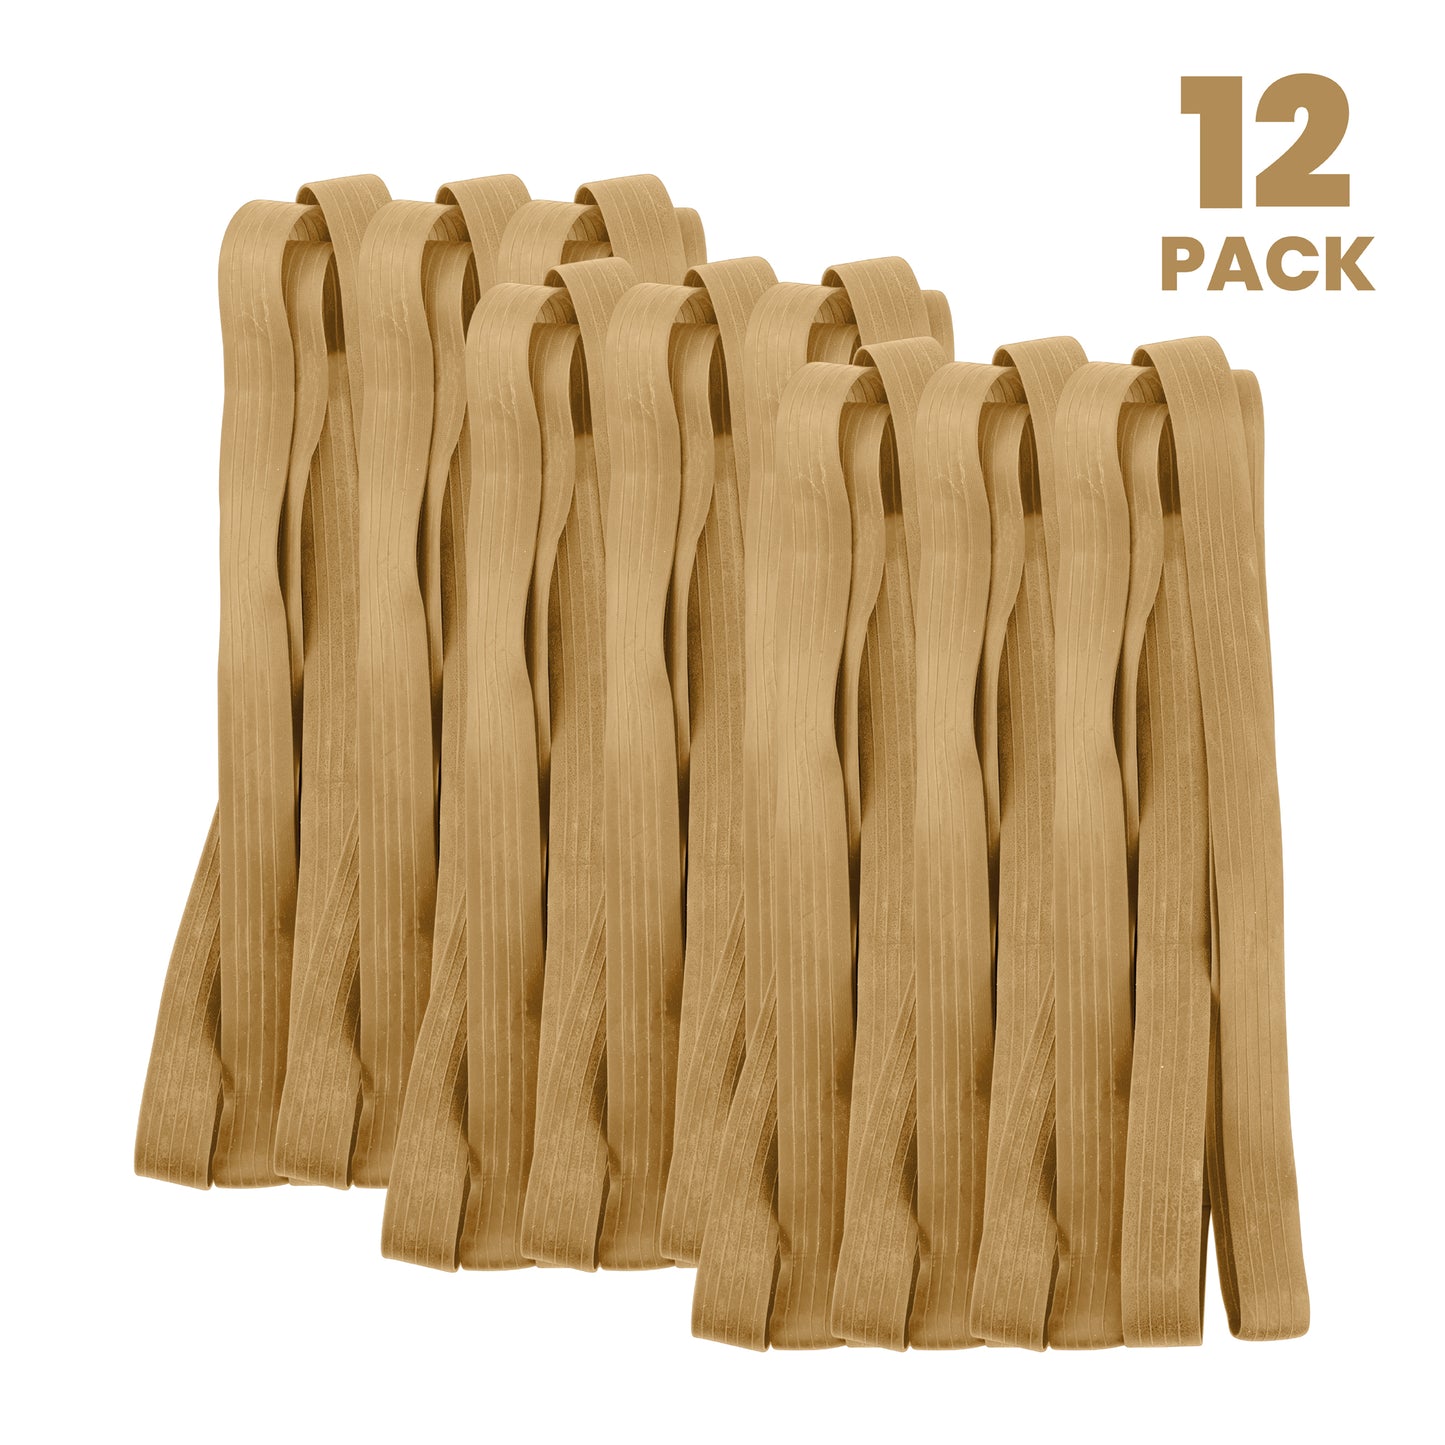 Furniture Mover Rubber Bands - Pack of 12